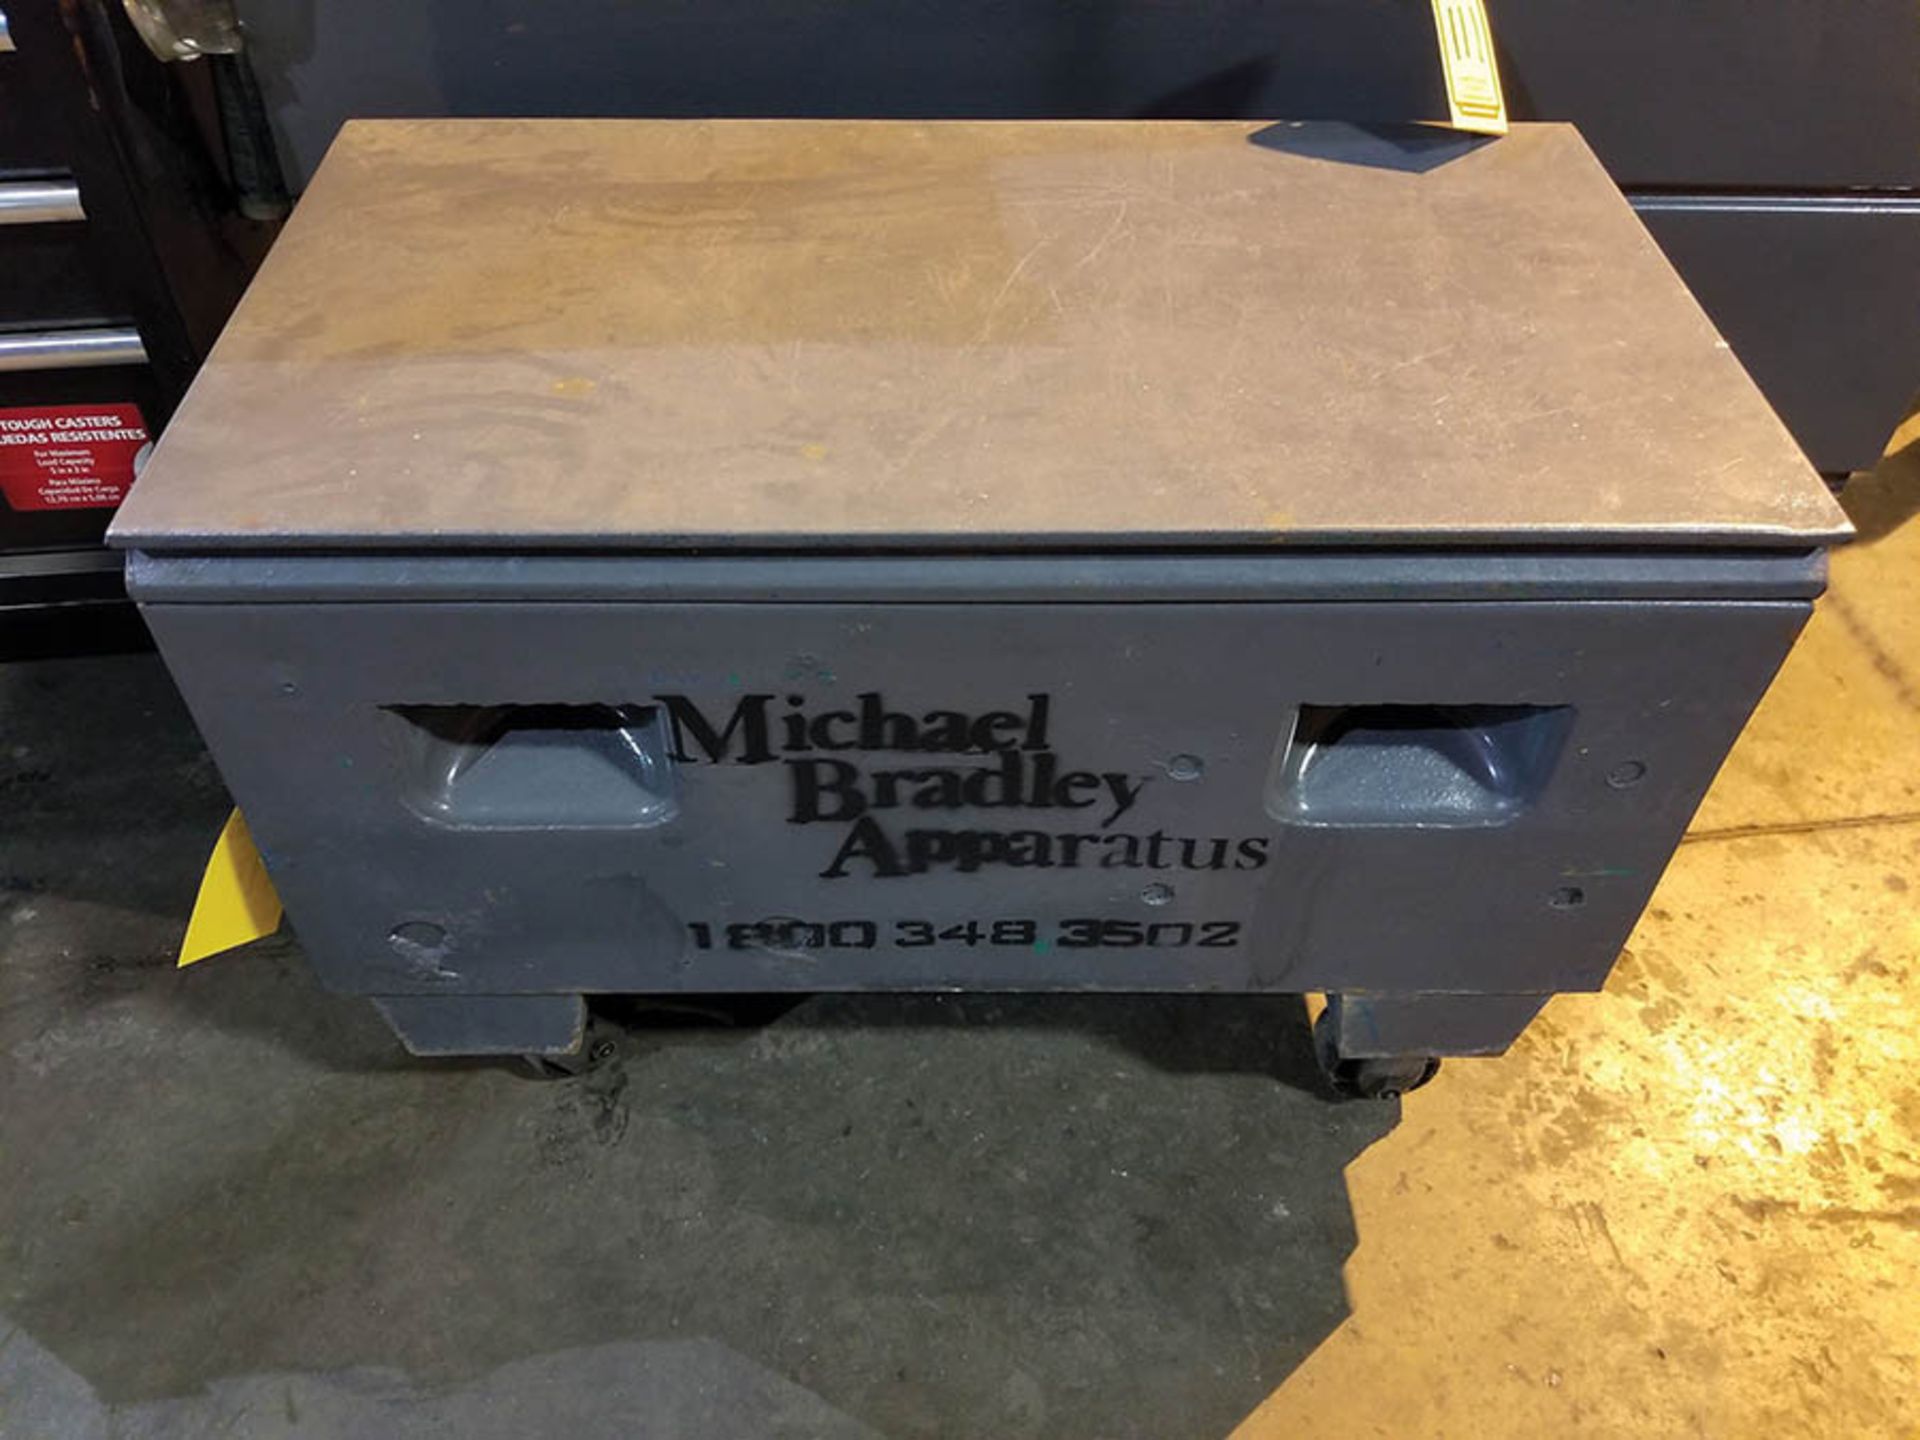 JOB BOX; 36" X 19" X 15" D, FULL OF TOOLS; HARD HATS, GLOVES, TORCH, AND OTHER ITEMS - Image 3 of 5